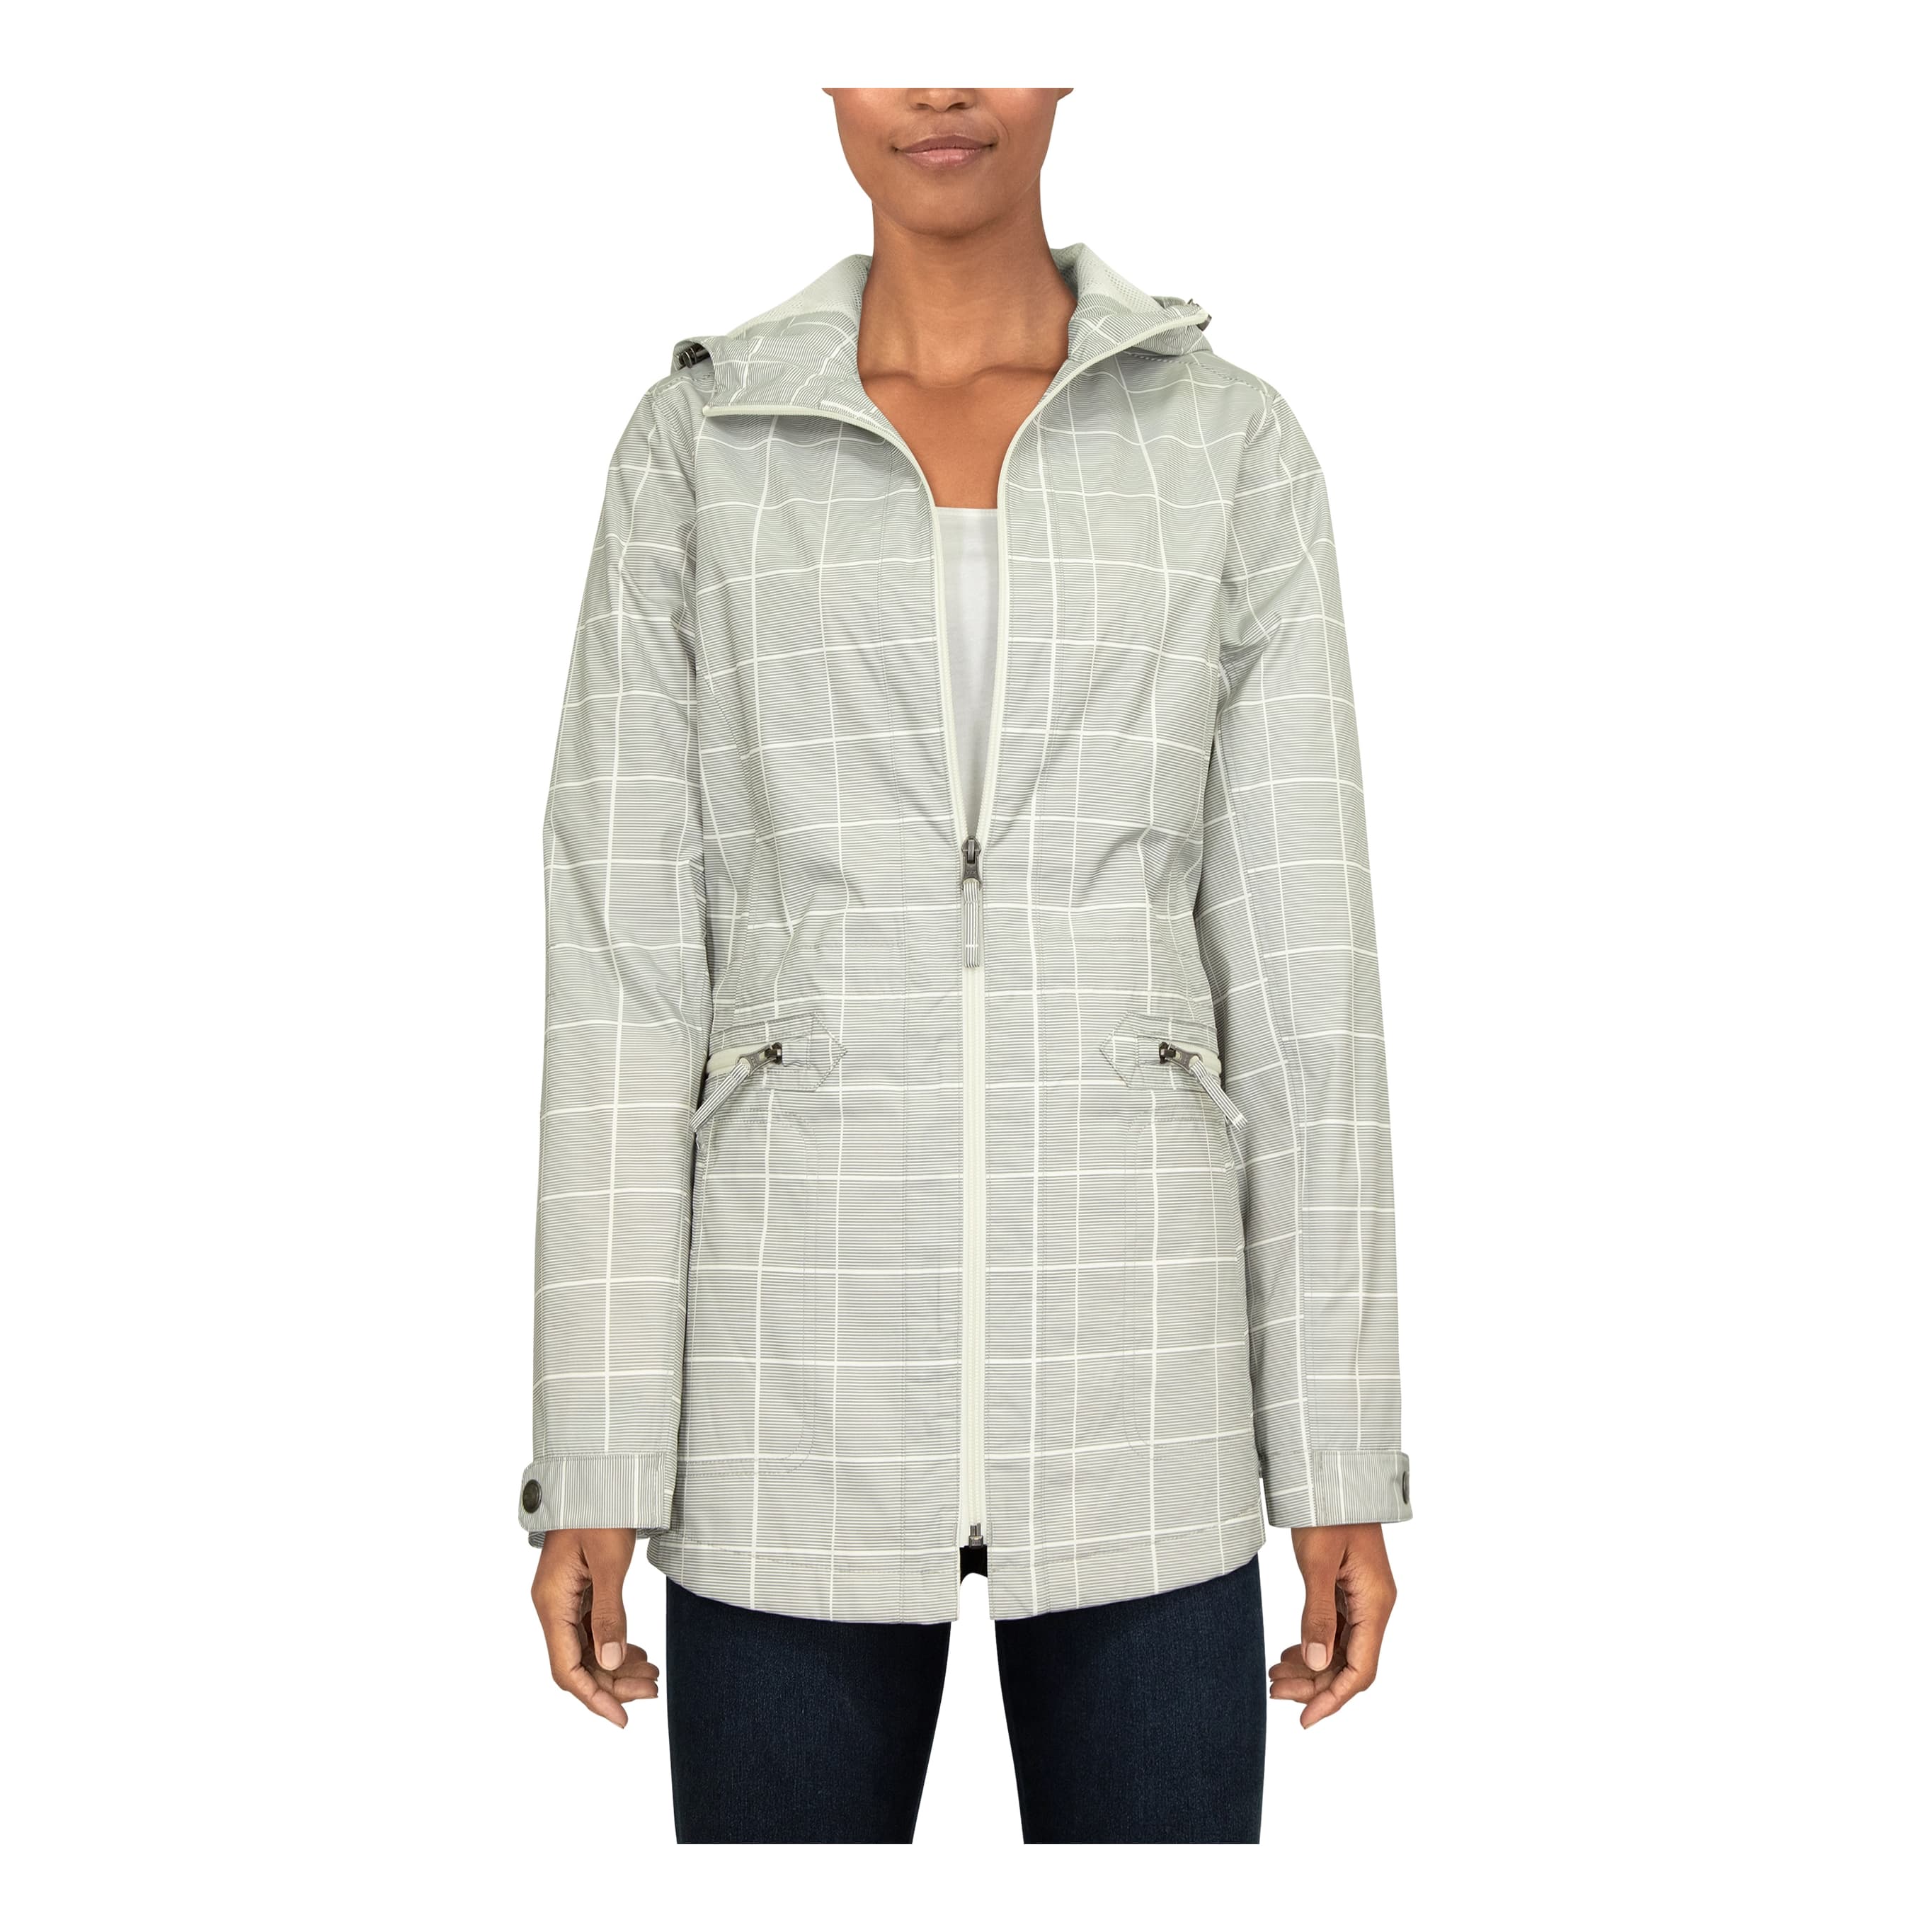 Natural Reflections® Women’s Essential Jacket - Grey/White Plaid